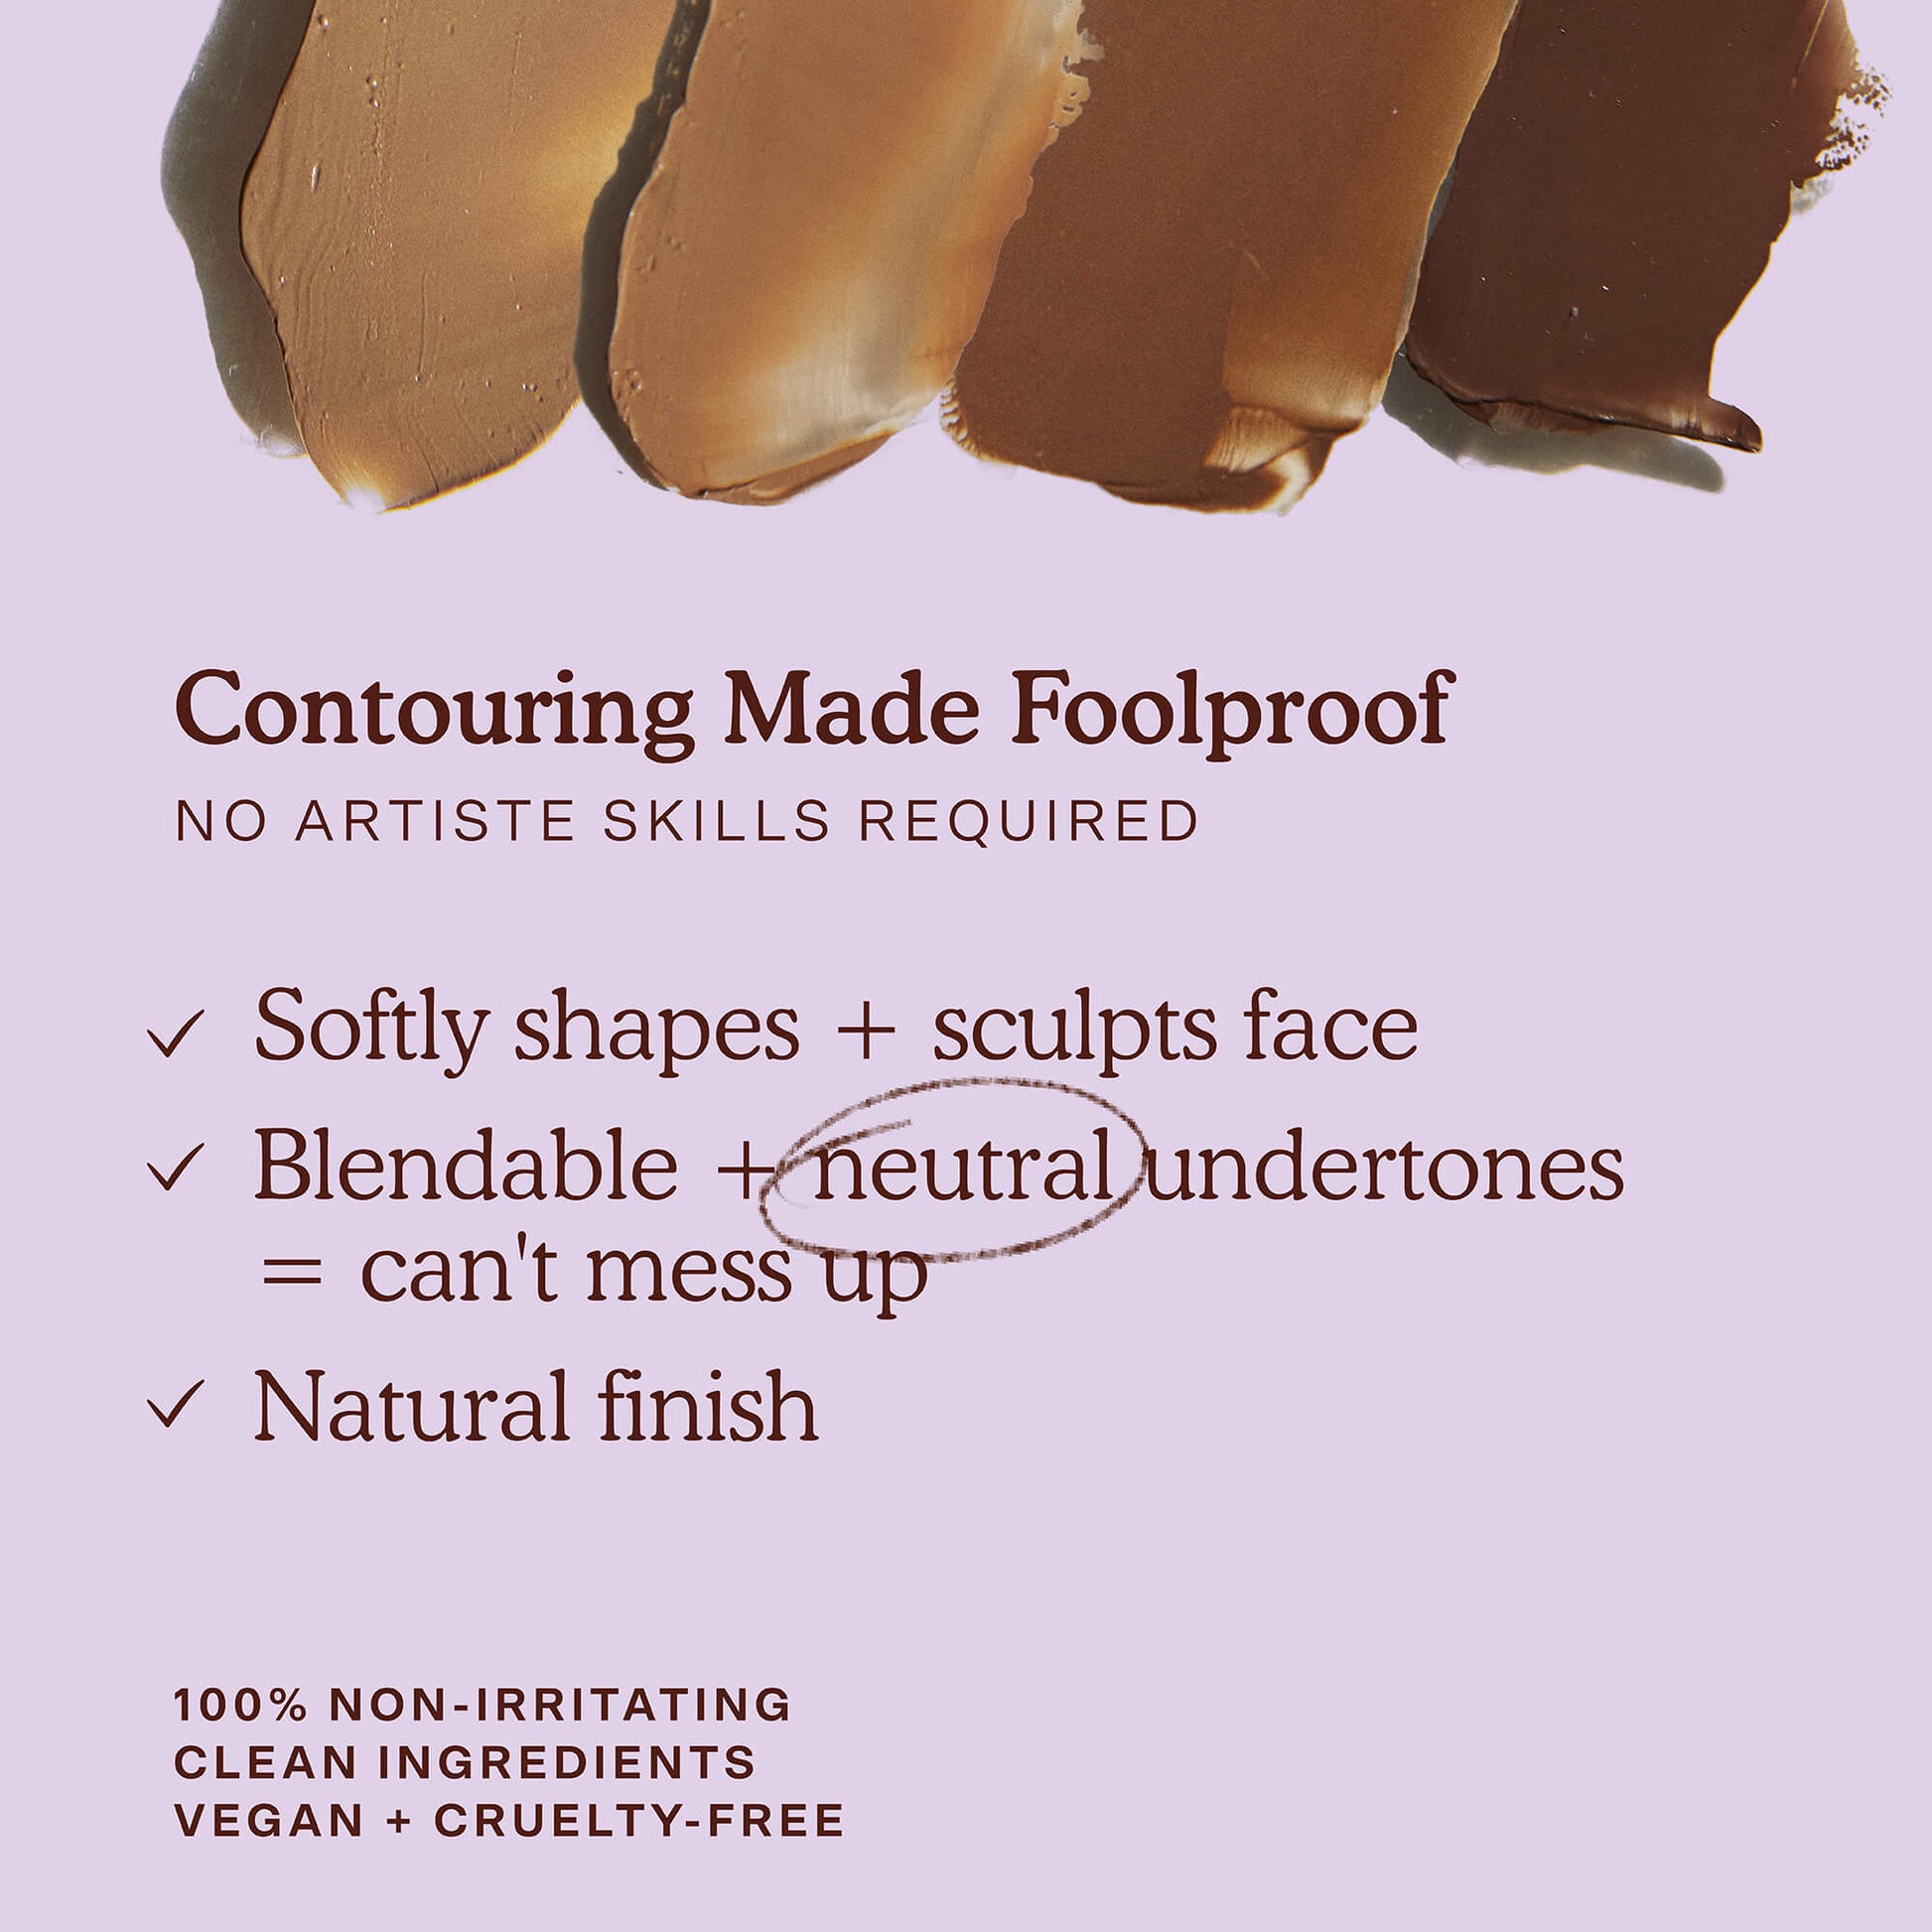 [Shared: Tower 28 Beauty Sculptino™ Cream Contour is contouring made foolproof. No artiste skills required. It softly shapes and sculpts the face. It's blendable and has neutral undertones, so you can't mess up. Plus it has a natural finish. It's also made with 100% non-irritating clean ingredients and also vegan + cruelty free